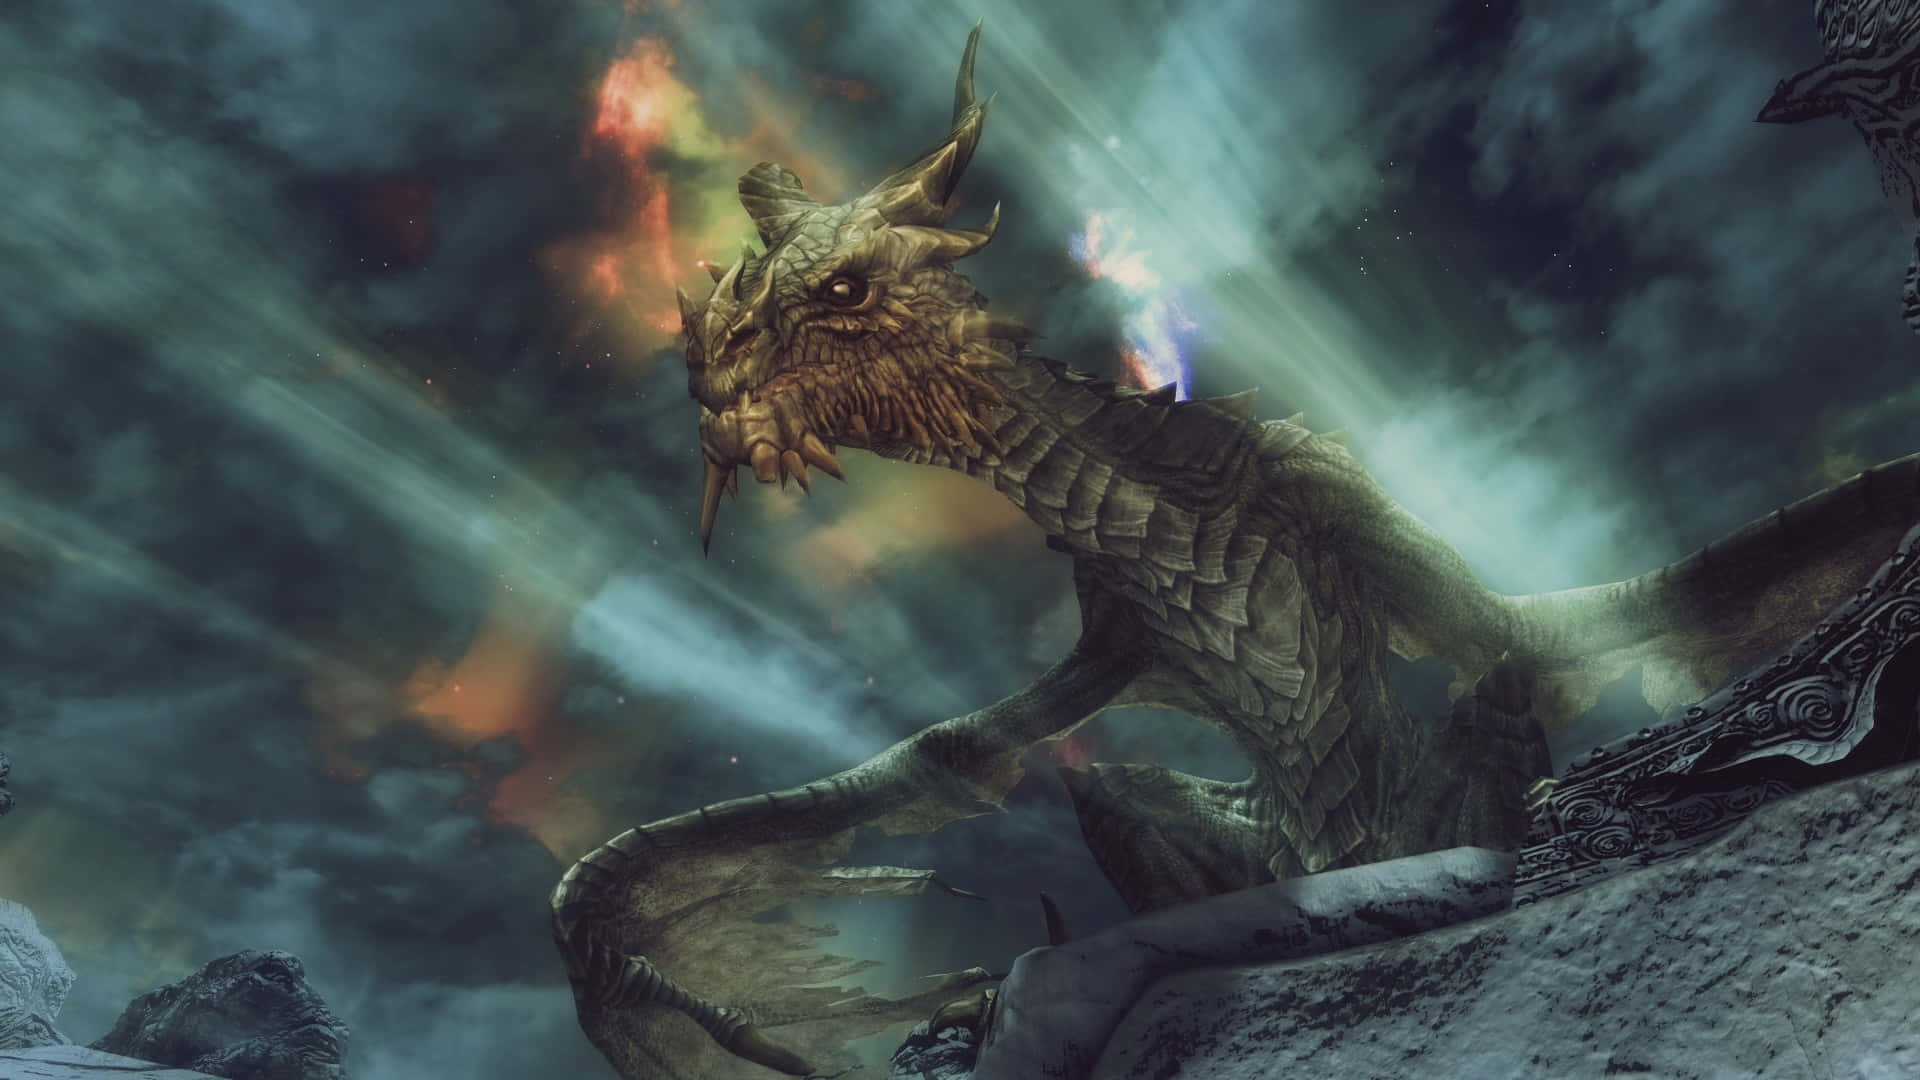 The Wise Dragon Paarthurnax in the Majestic World of Skyrim Wallpaper